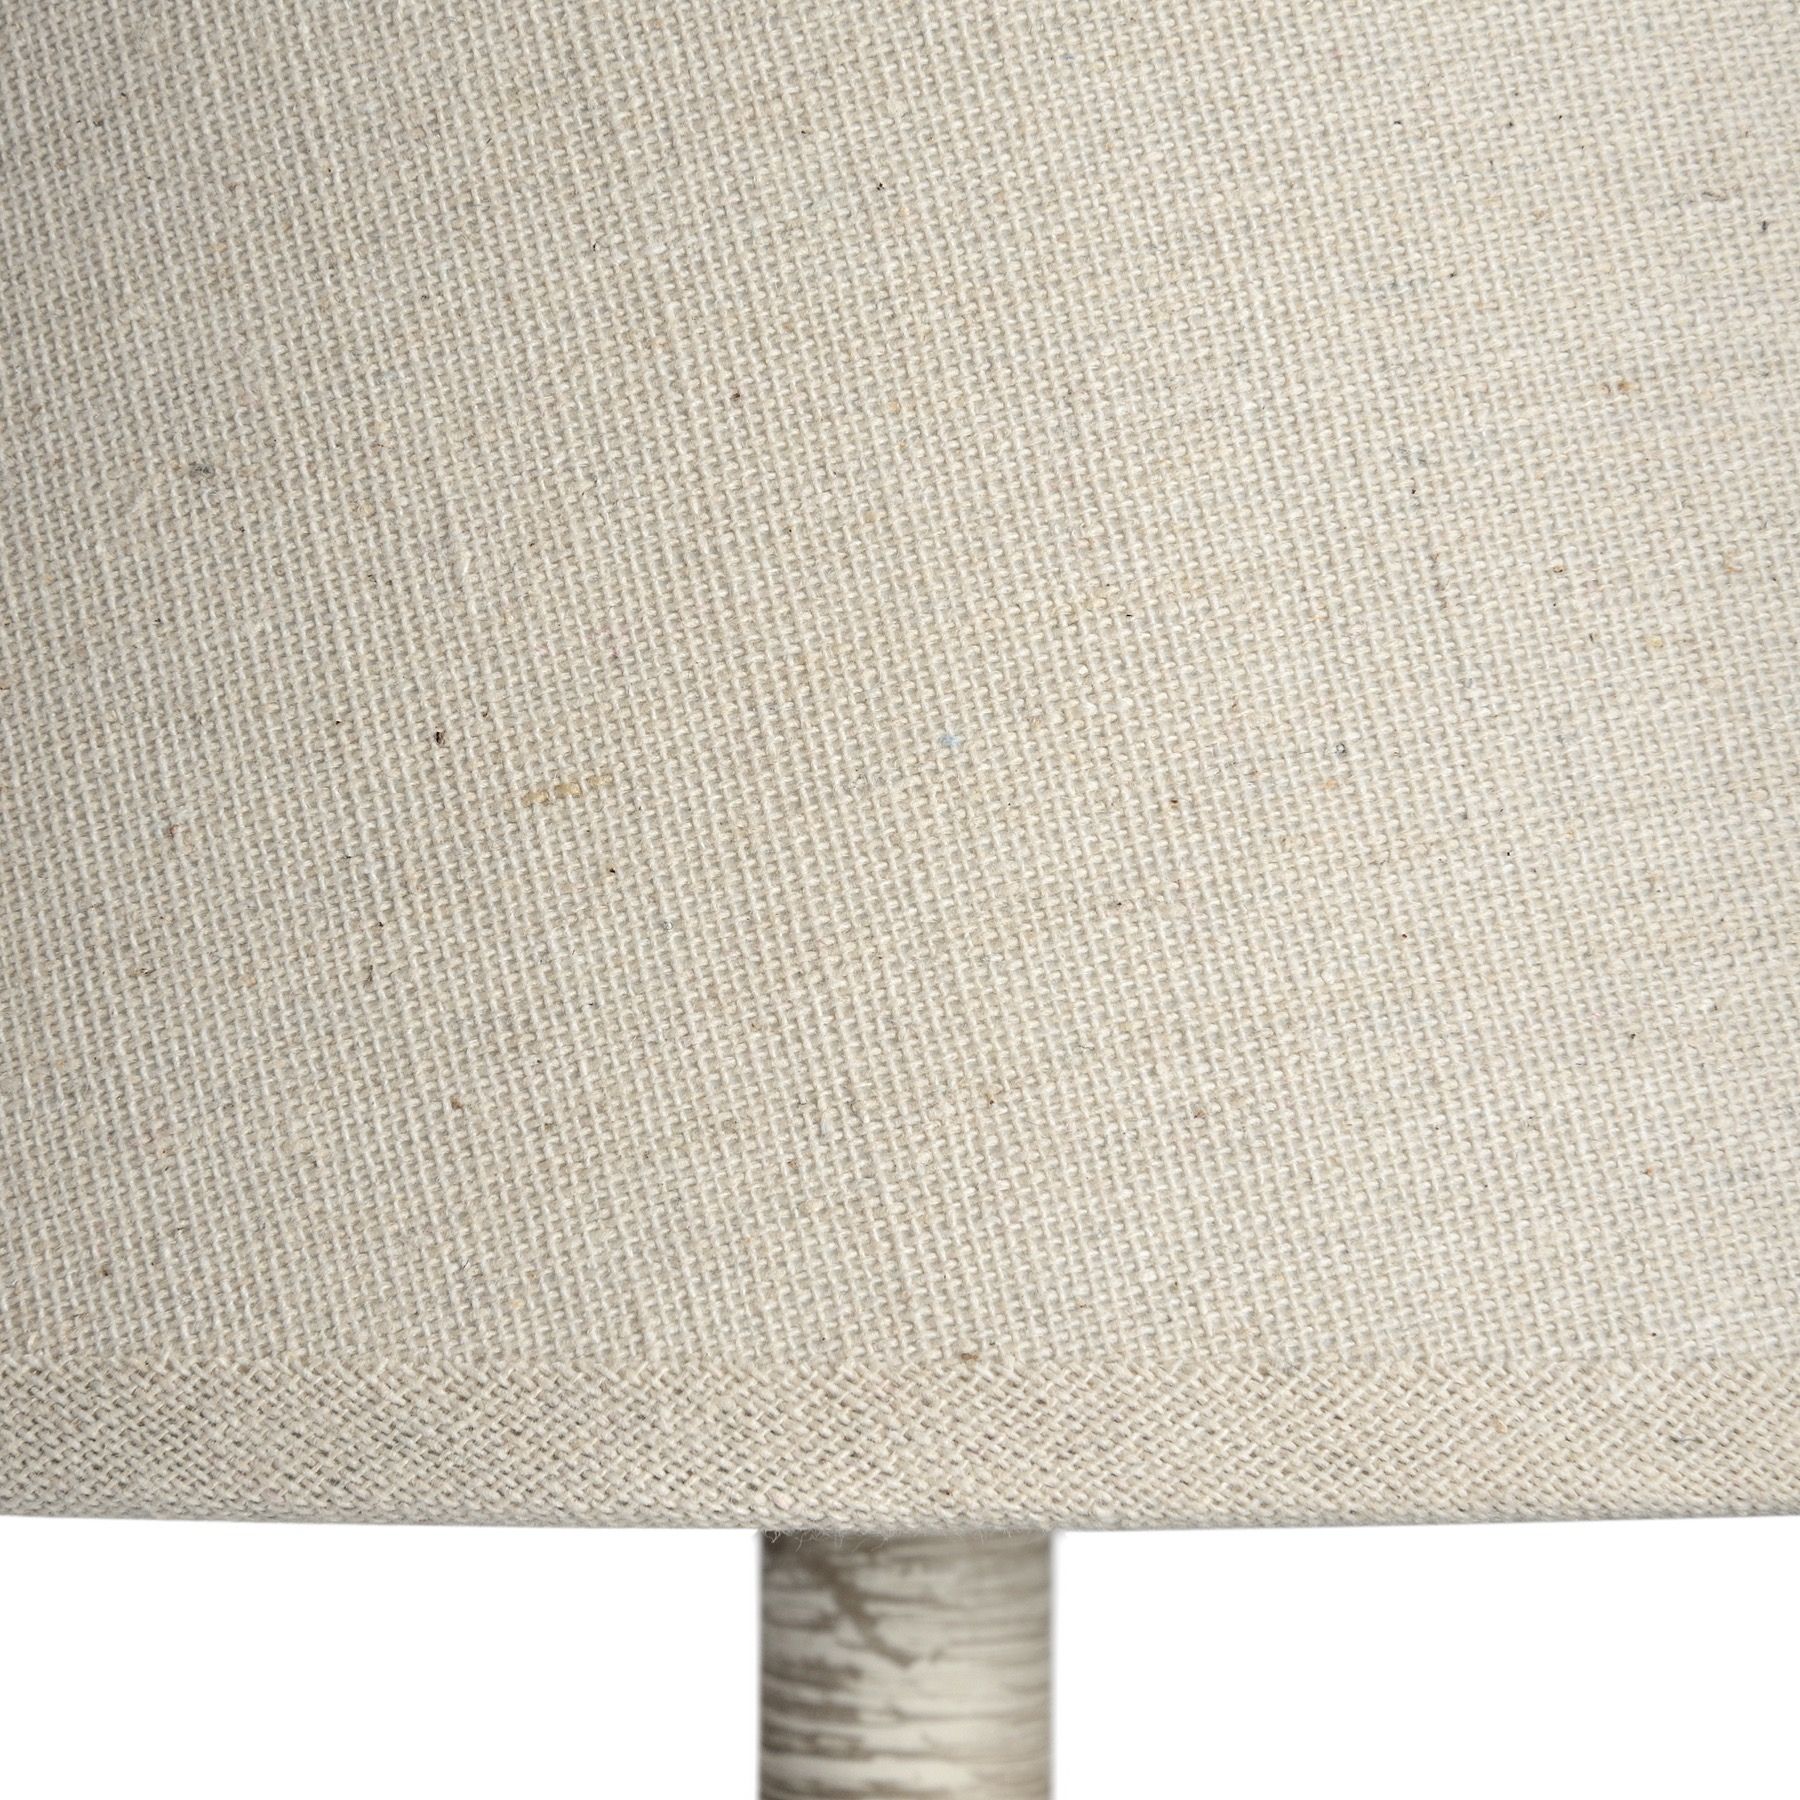 Leptis Magna Table Lamp - Image 3